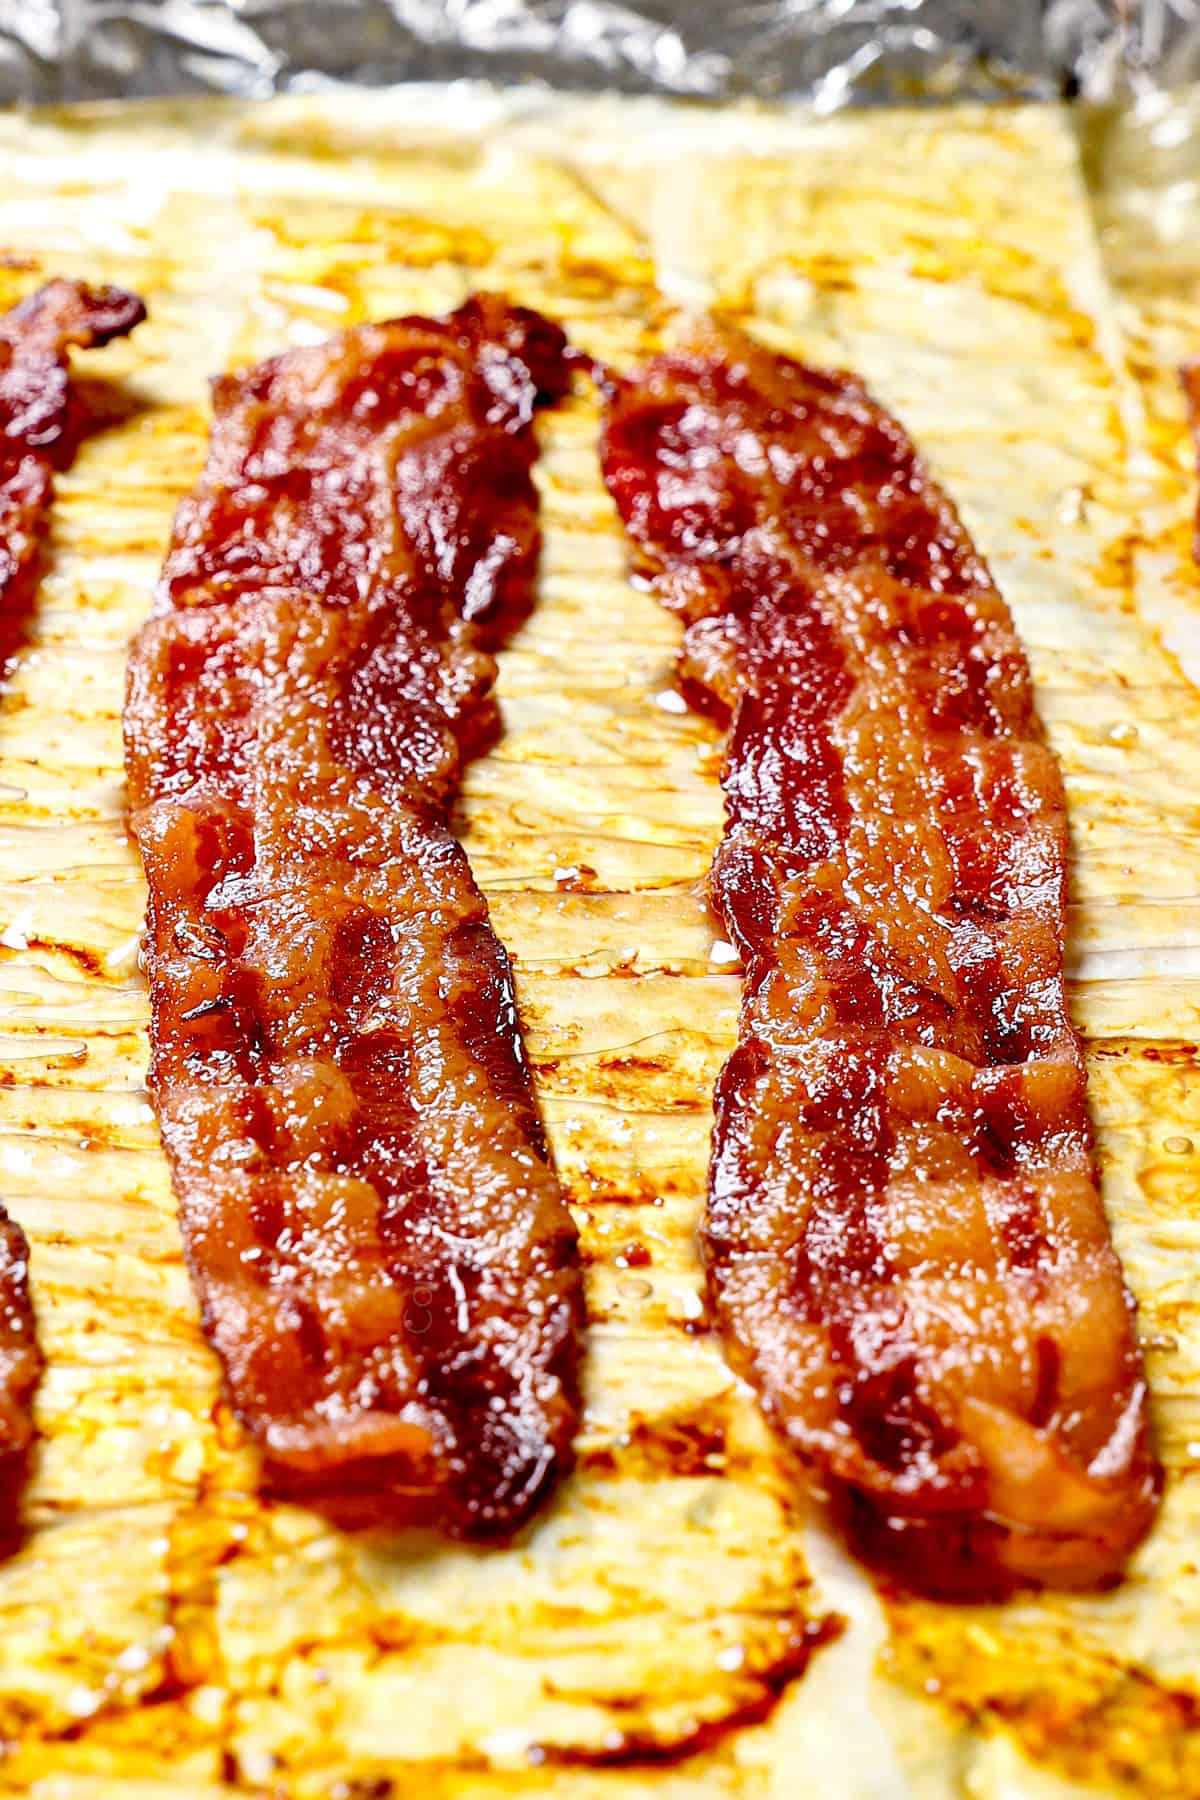 up close of cooking bacon in the oven showing how crispy the slices get